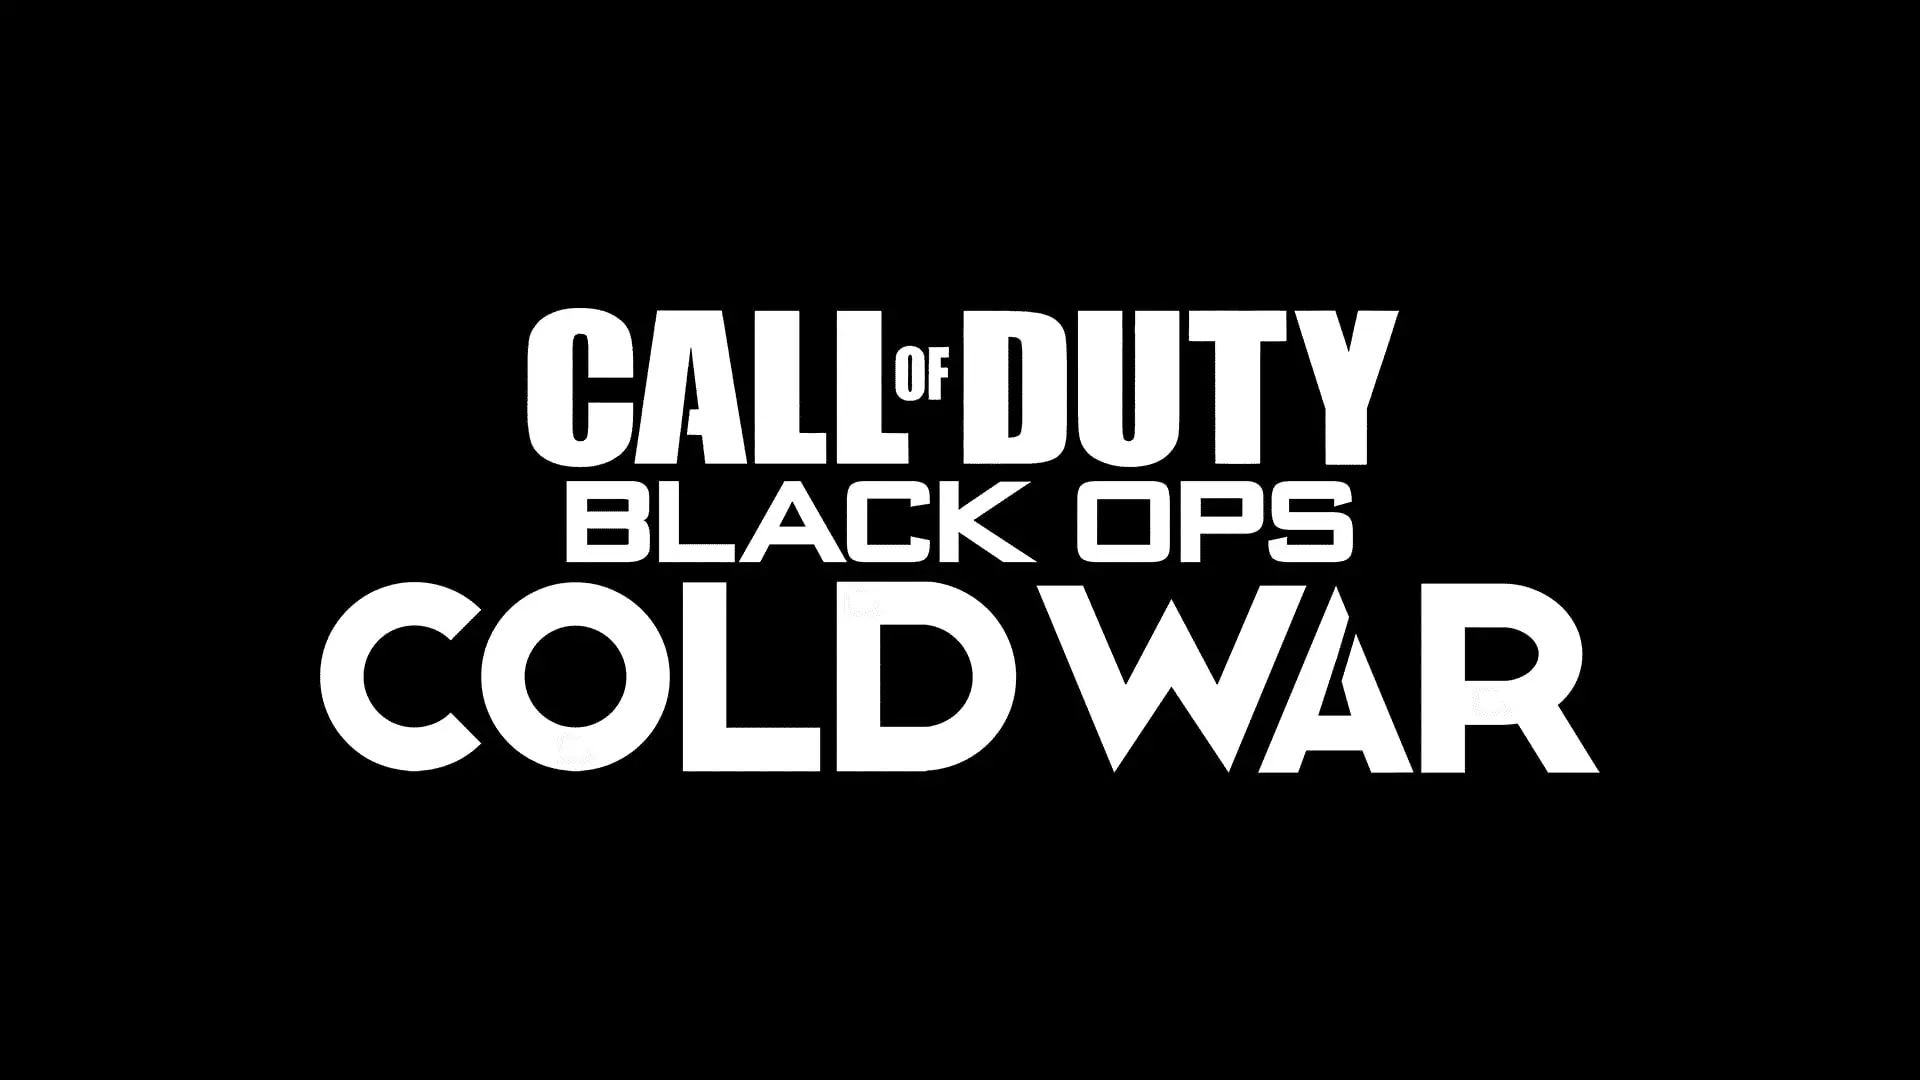 call of duty: black ops cold war prices